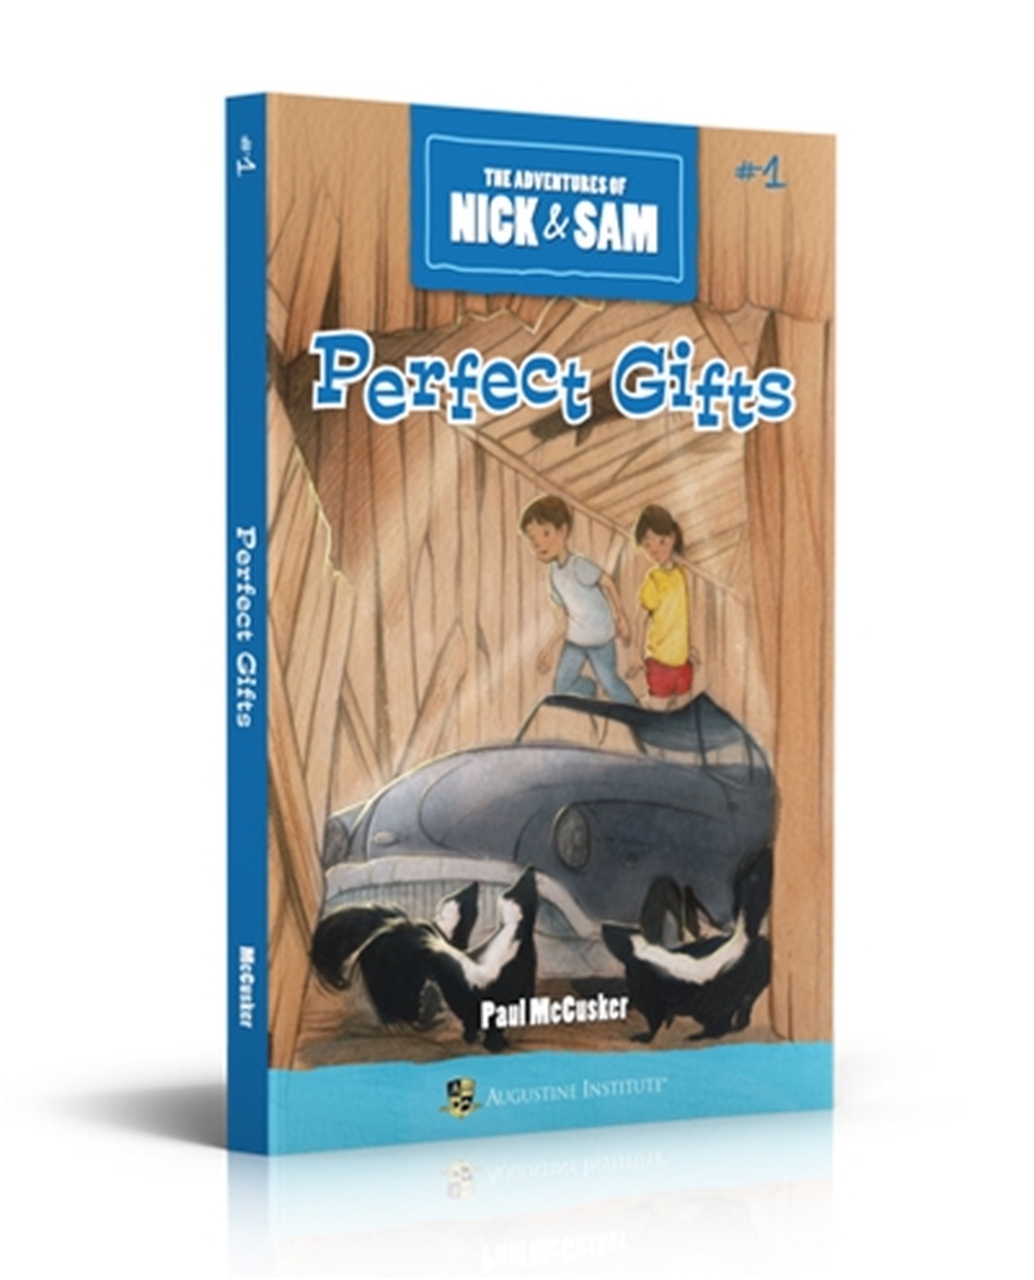 Perfect Gifts The Adventures of Nick & Sam Book #1 / Paul McCusker